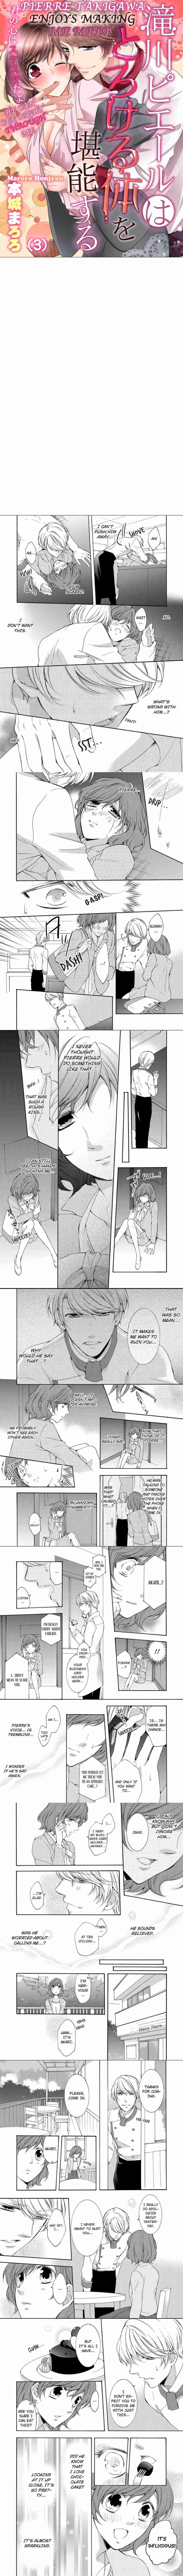 Pierre Takigawa Enjoys Making Me Melt: He can see right through me ~ Vol.1 Ch.3